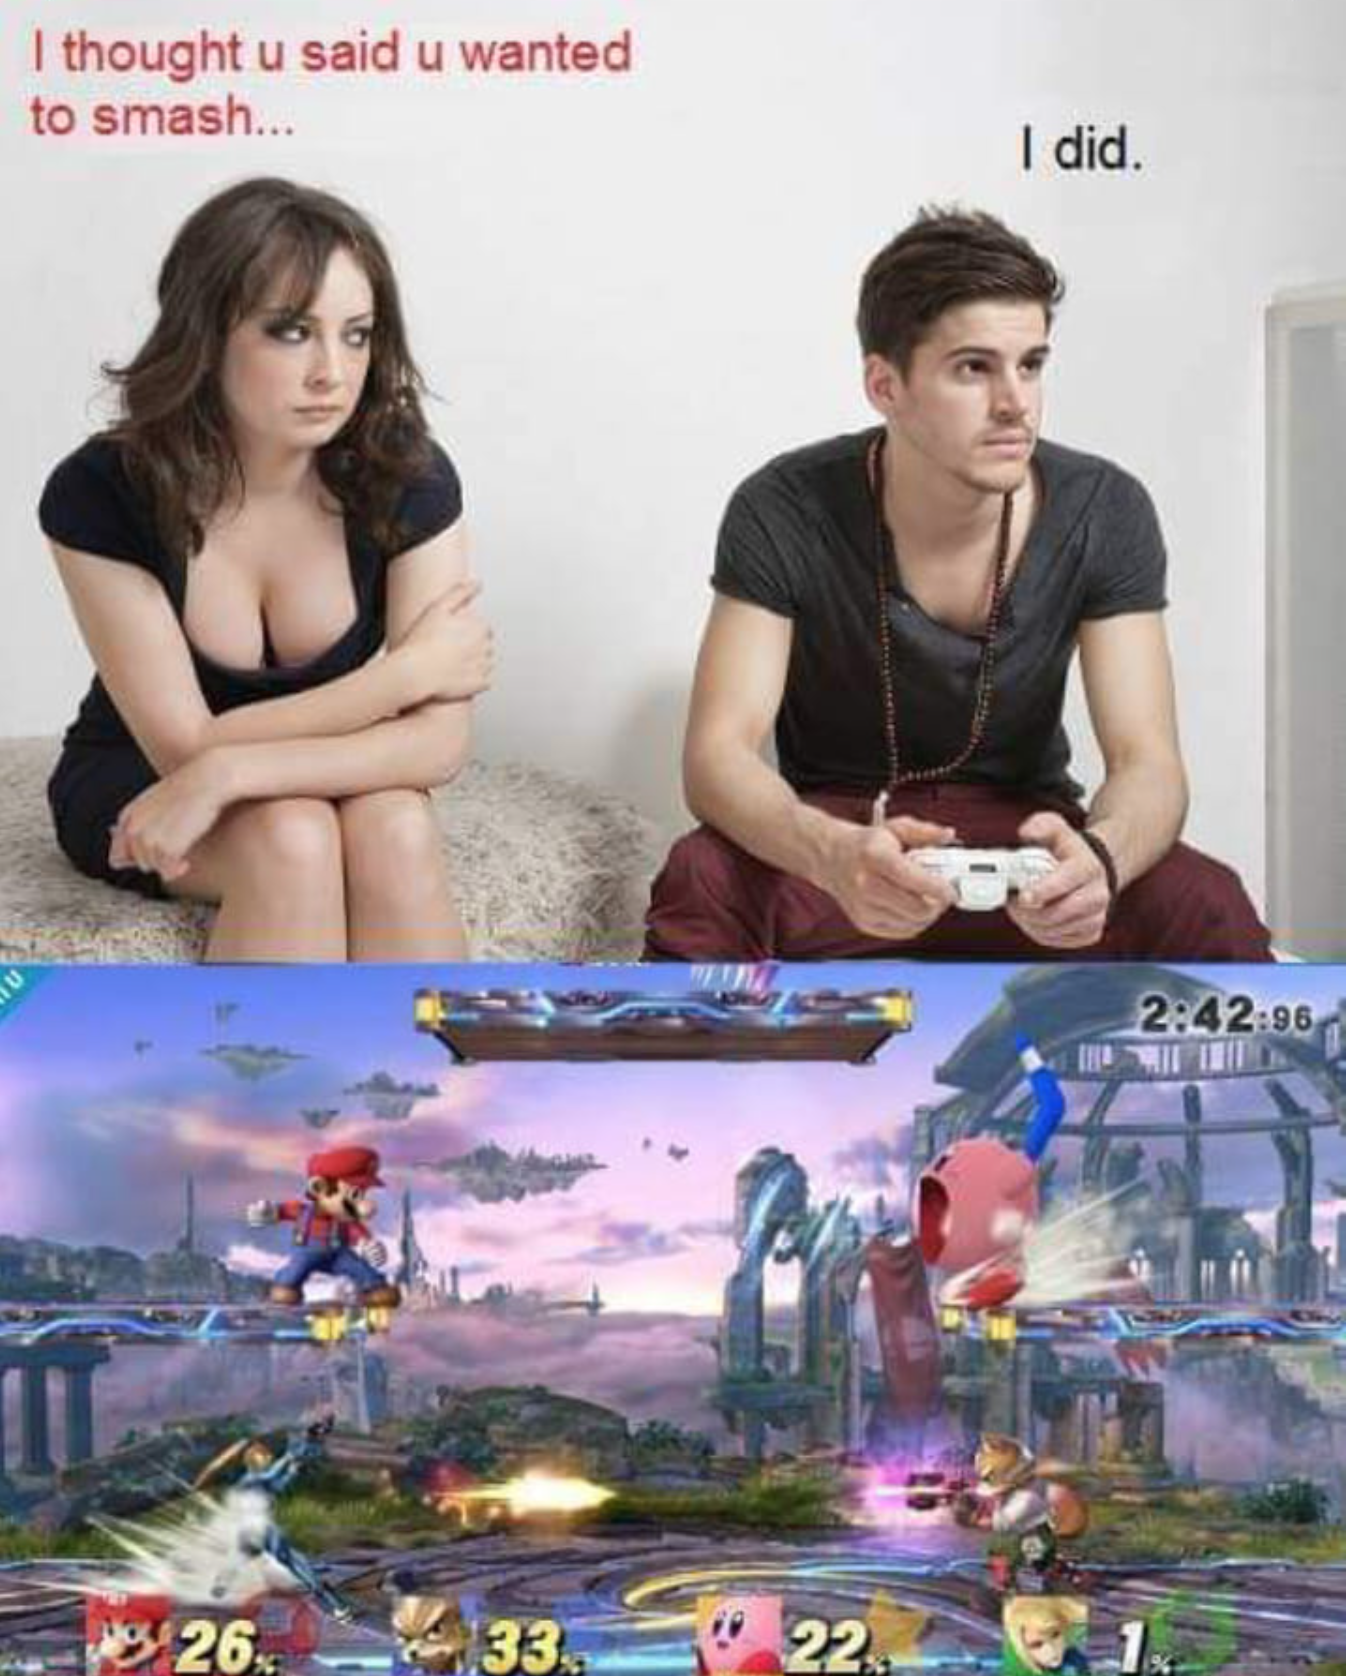 funny gaming memes - thought you wanted to smash - I thought u said u wanted to smash... I did. 96 Us 26, 33. 22